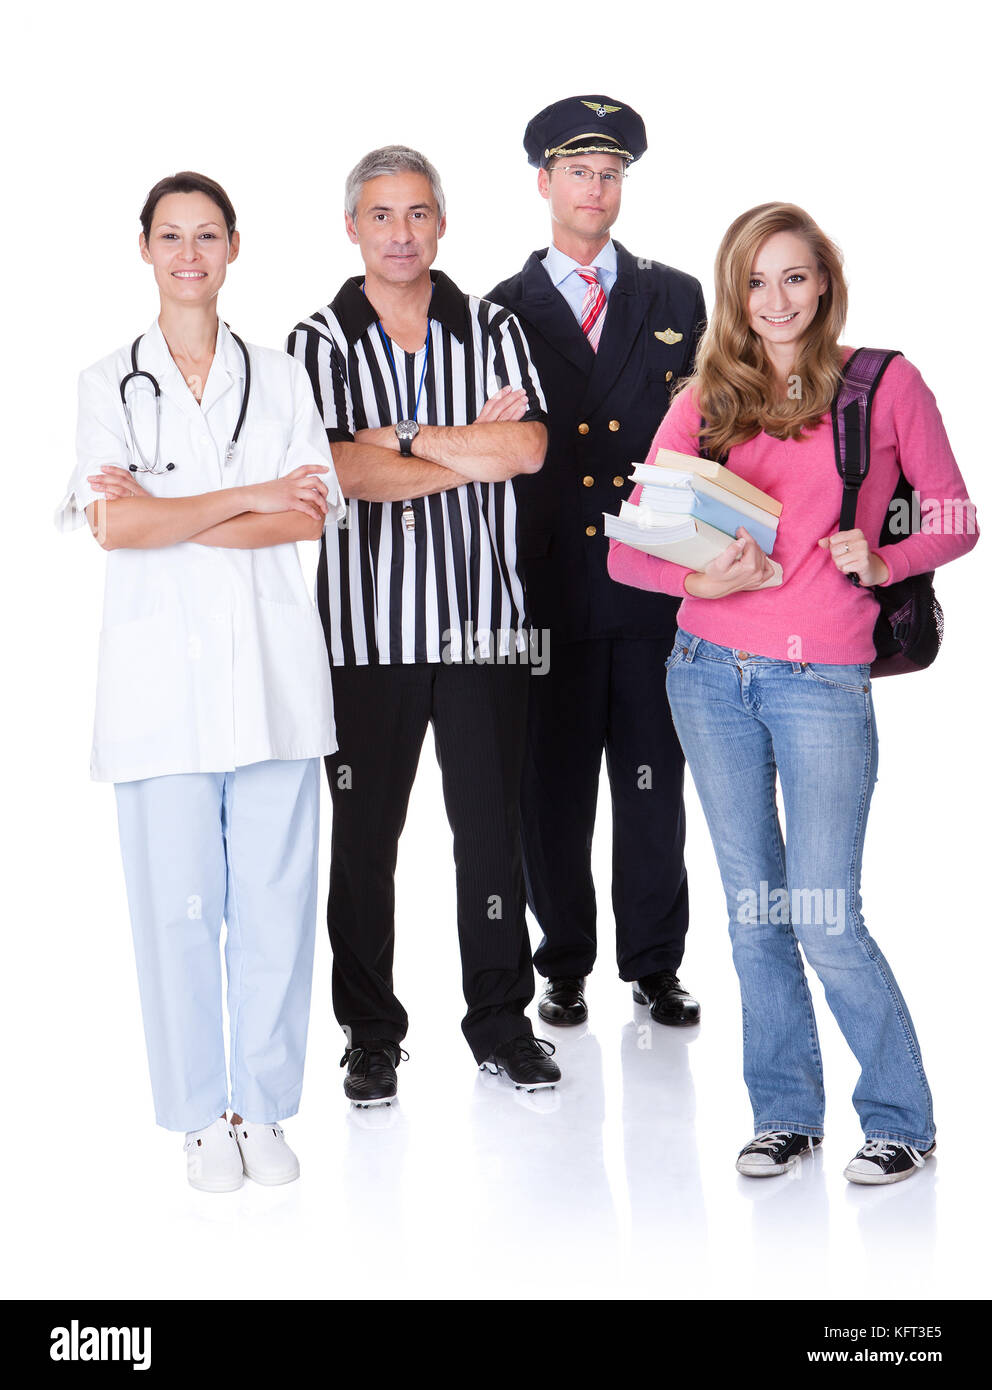 Diverse group of people from the community including professionals - pilot and doctor Stock Photo